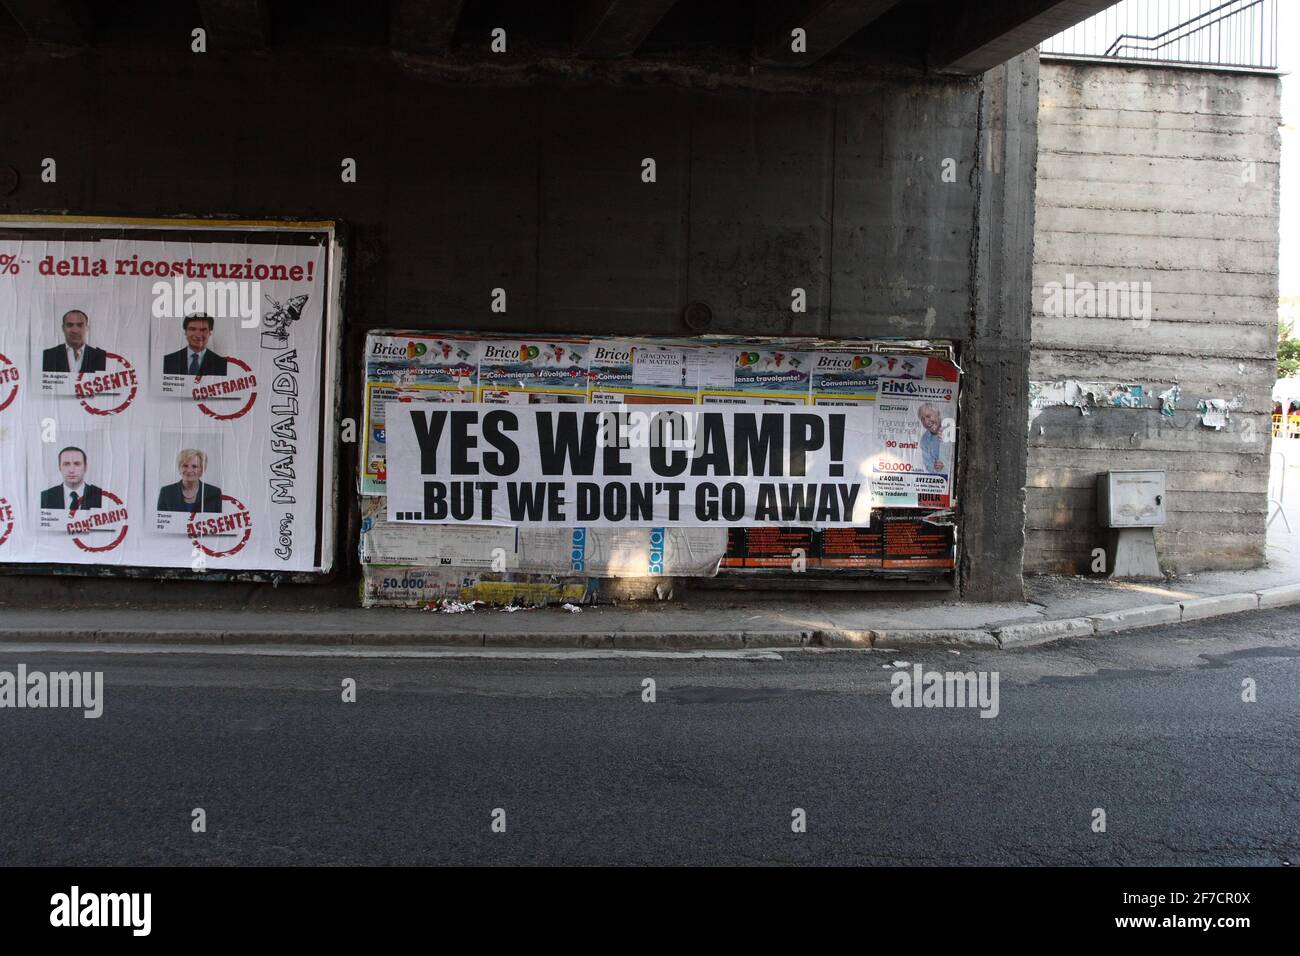 L'Aquila, Italy - July 9, 2009: The city destroyed by the earthquake and the motto 'yes we camp' Stock Photo